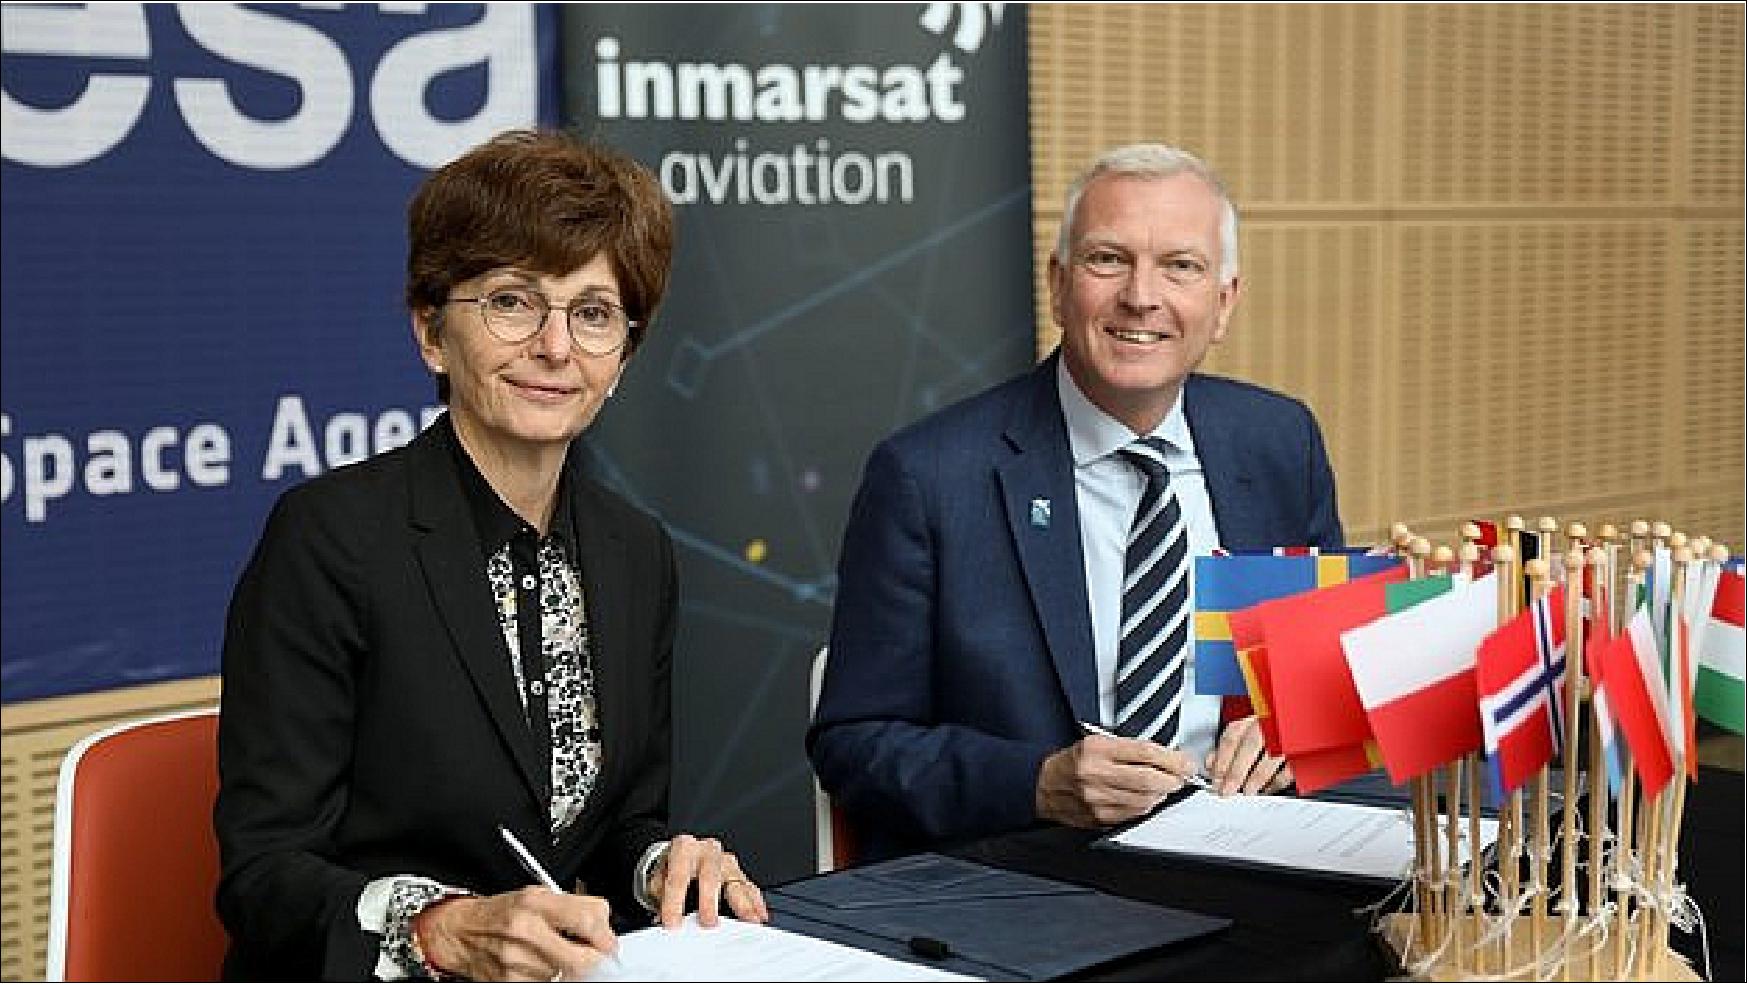 Figure 6: Magali Vaissiere, Director of Telecommunications and Integrated Applications at ESA, and Phil Balaam, President of Inmarsat Aviation, sign an agreement to put satellite-based data communication links terminals on up to 20 aircraft flying commercial services across continental Europe (image credit: ESA)